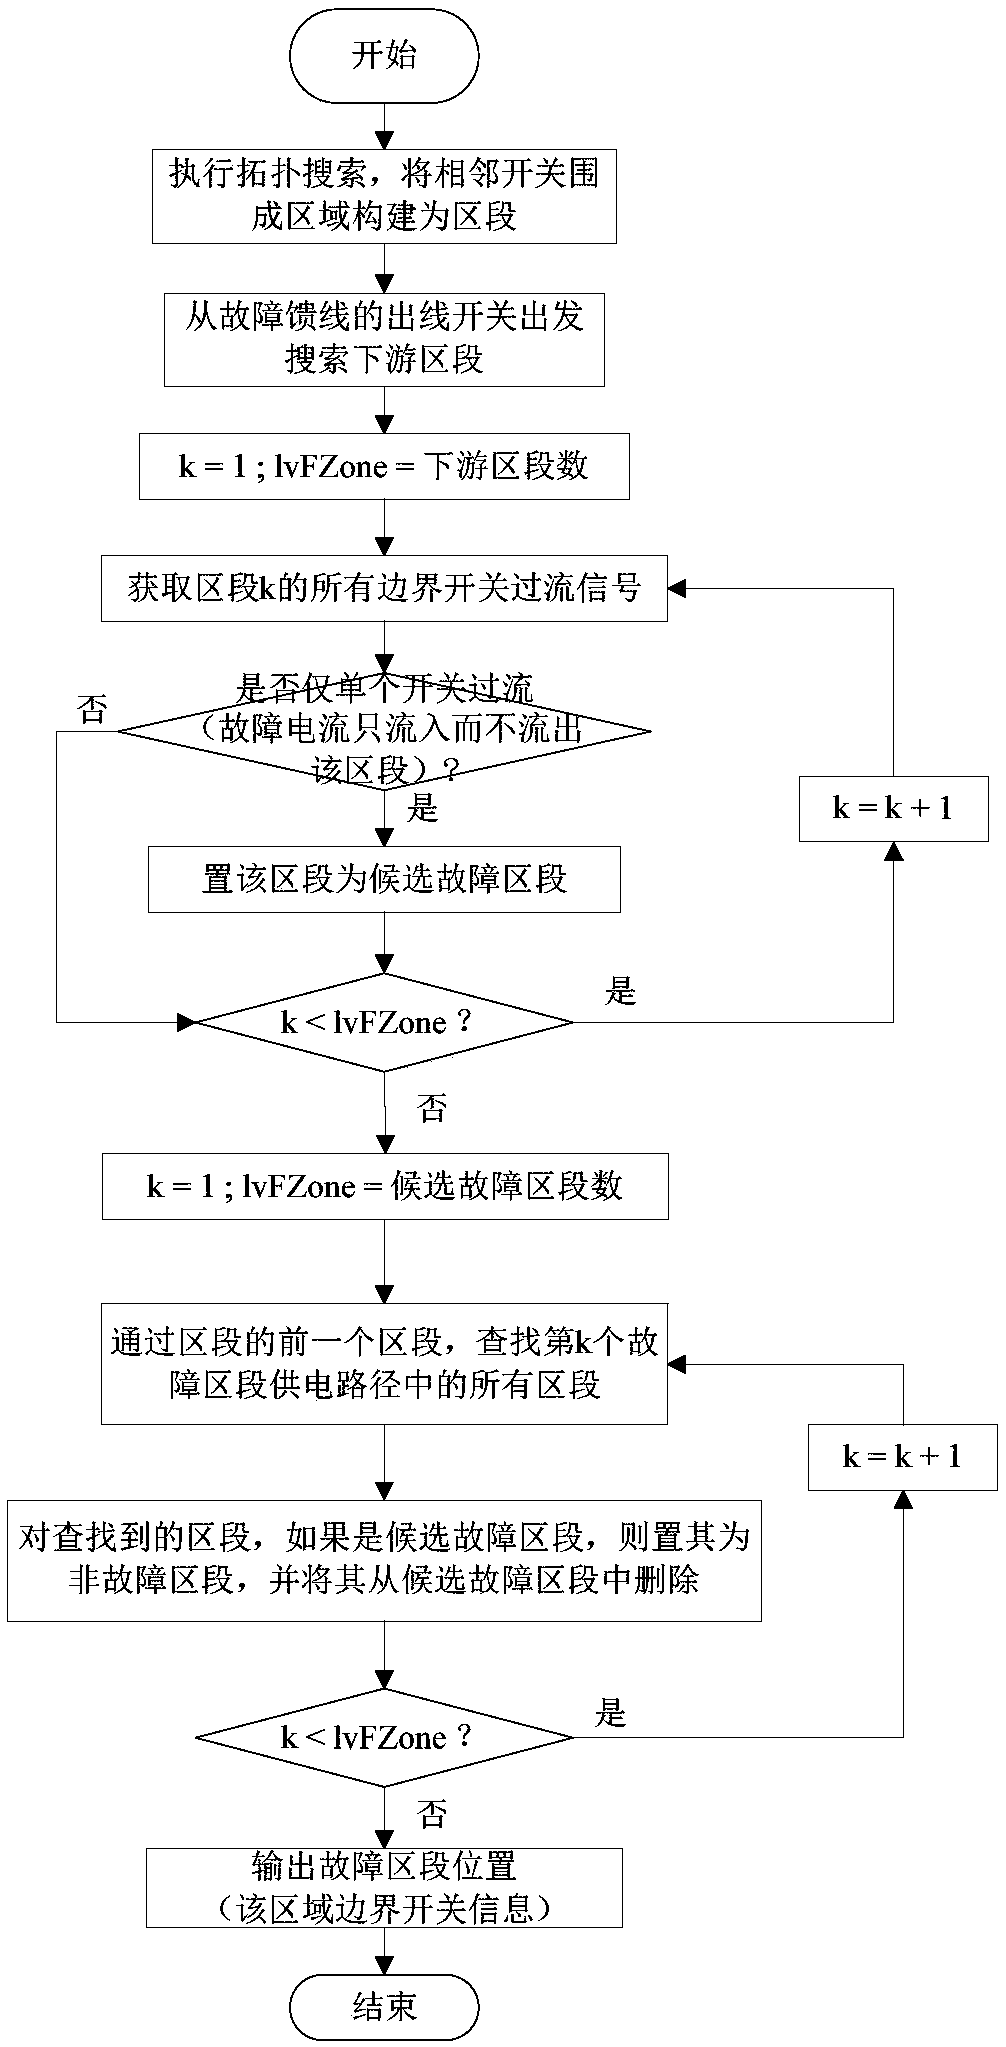 Power distribution network self-healing control method combining master station and local control